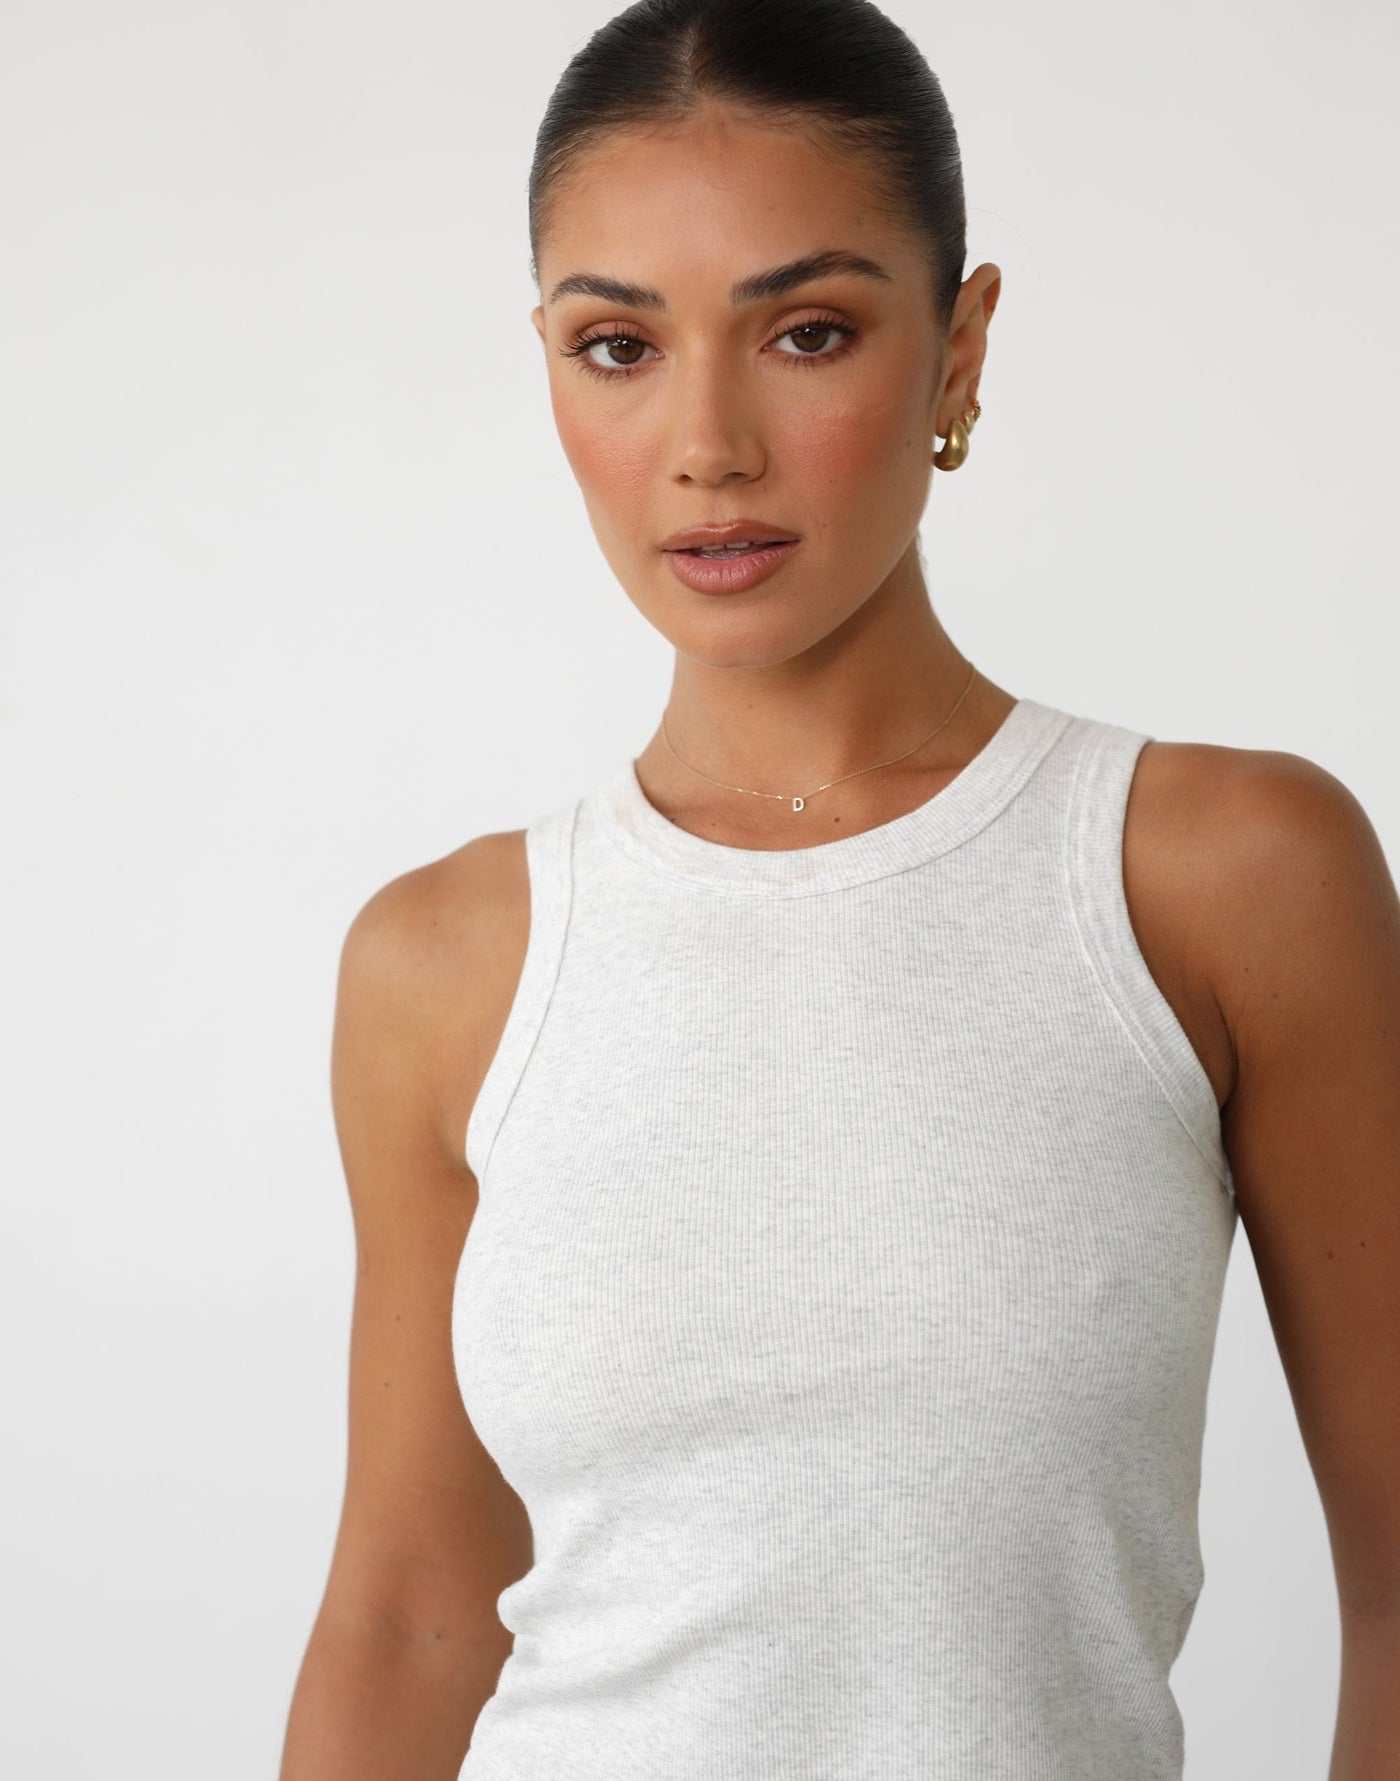 Cornell Tank Top (Grey) | Ribbed Tank Top - Women's Top - Charcoal Clothing